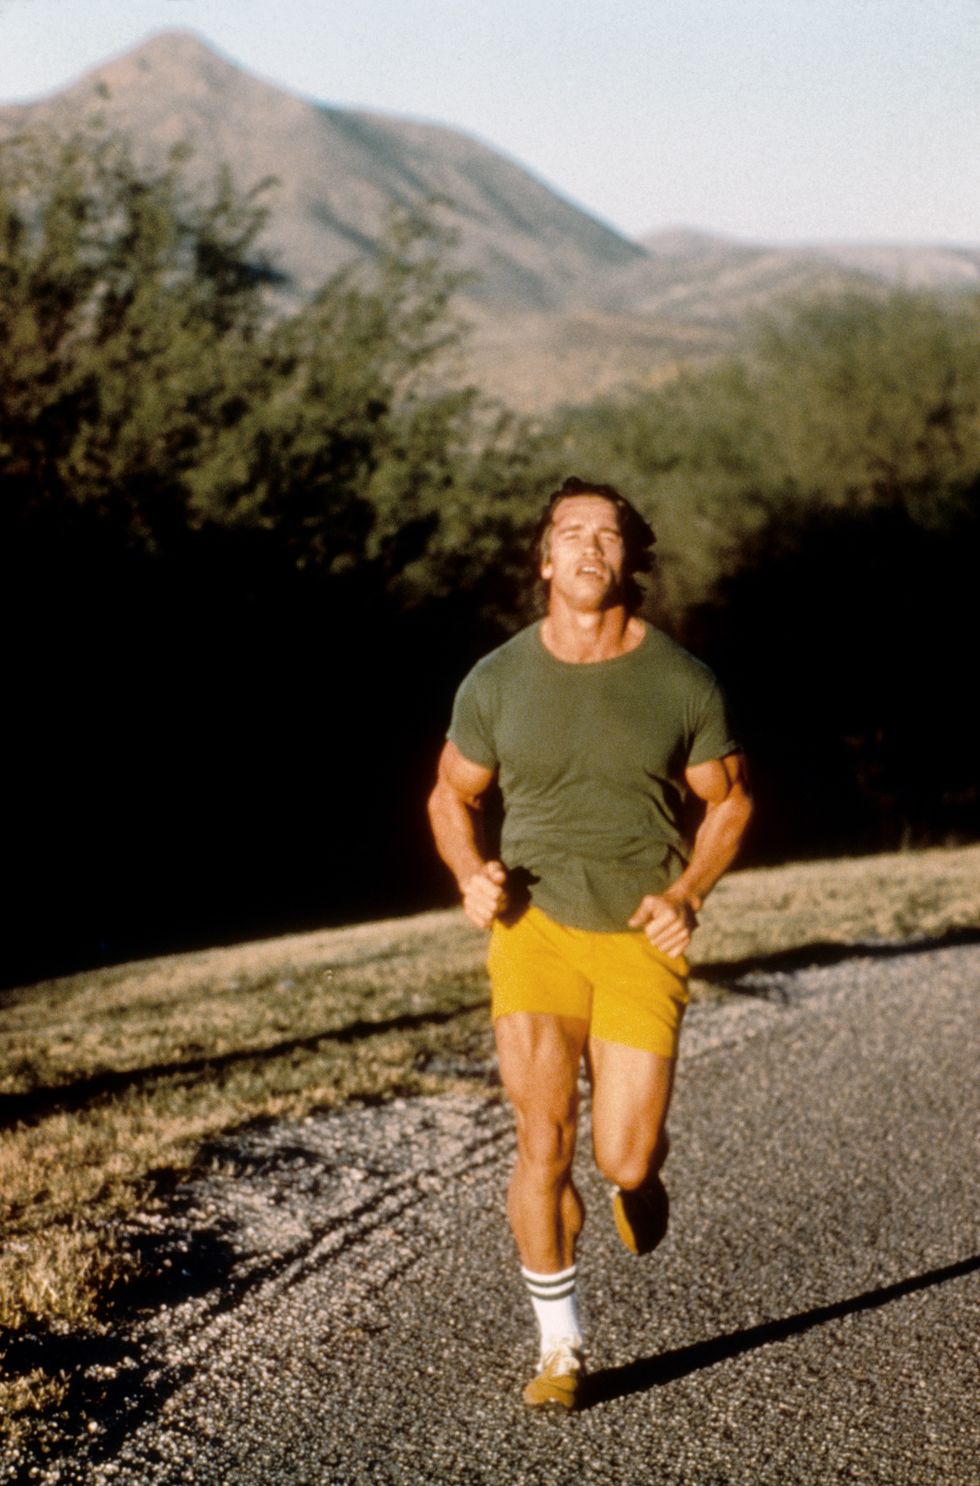 los angeles   circa 1977  austrian bodybuilder arnold schwarzenegger out for a run circa 1977 in los angeles, california photo by michael ochs archivesgetty images